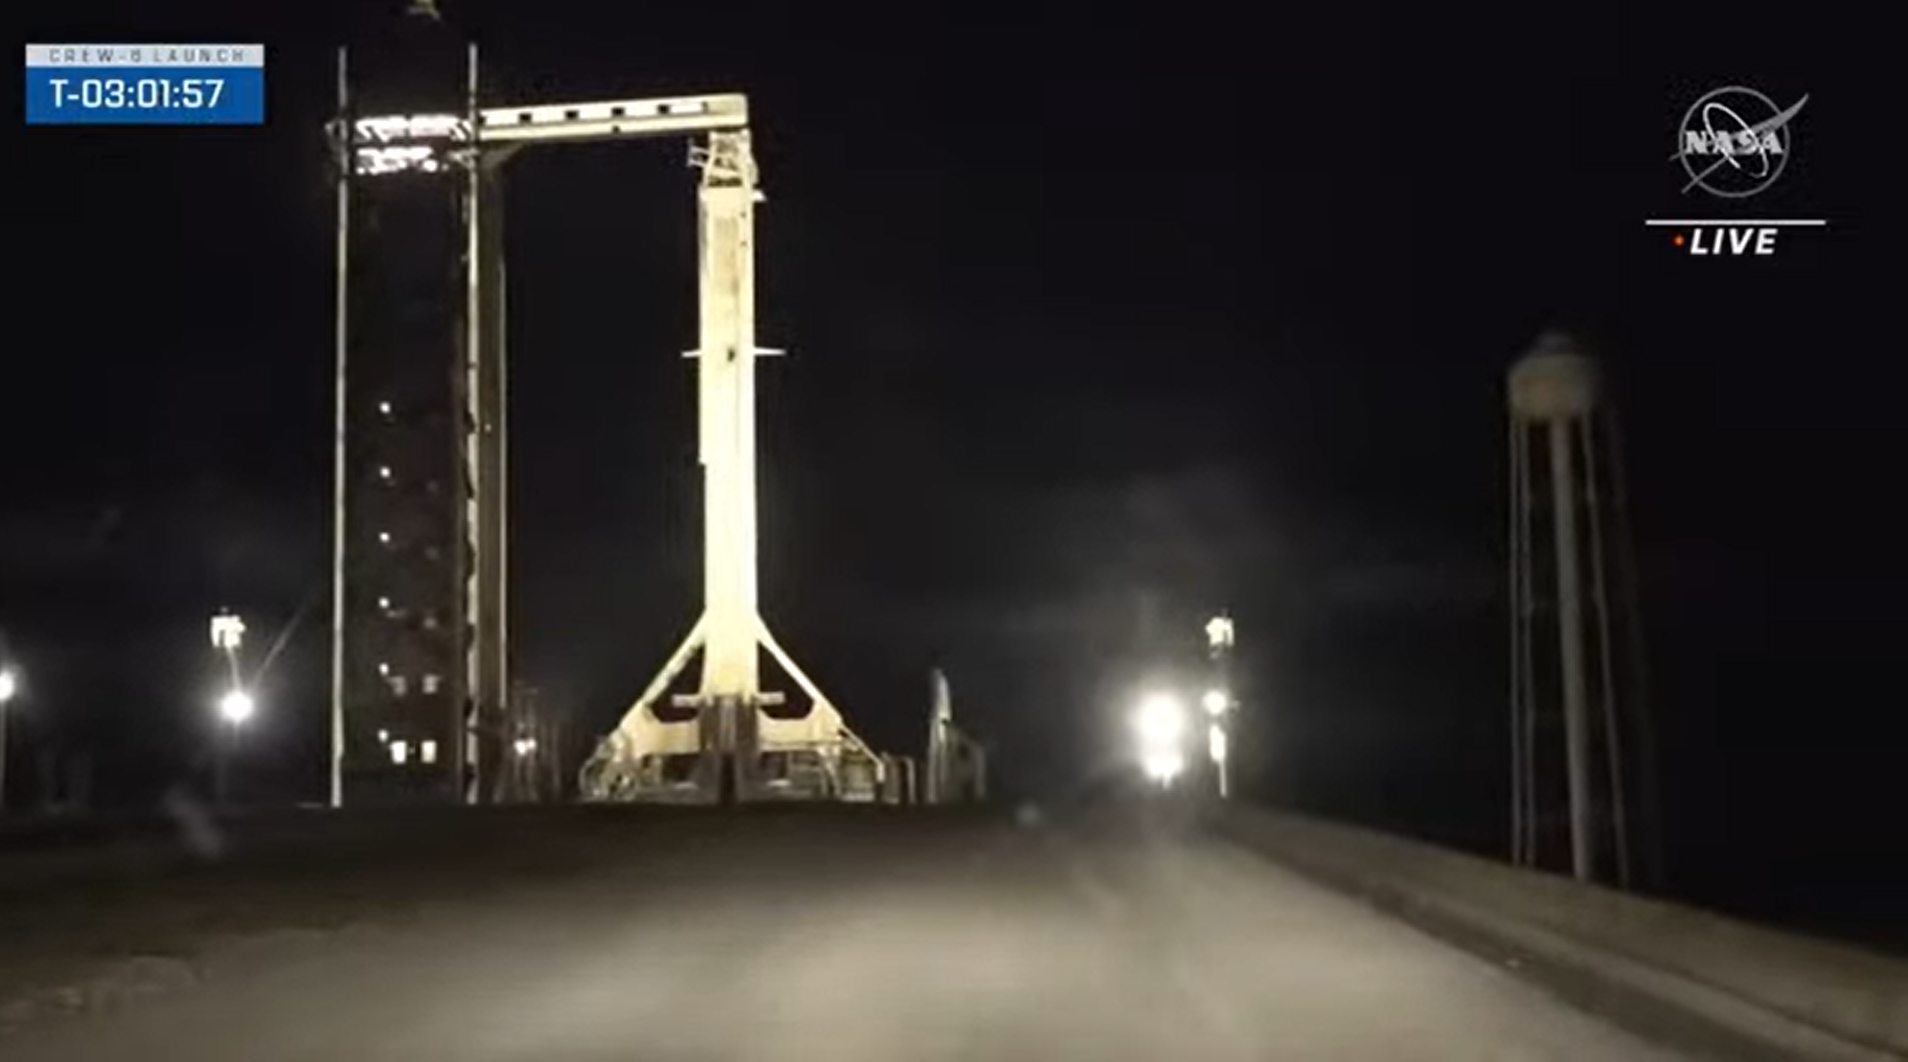 SpaceX's Falcon 9 rocket for the Crew-6 mission on the launch pad